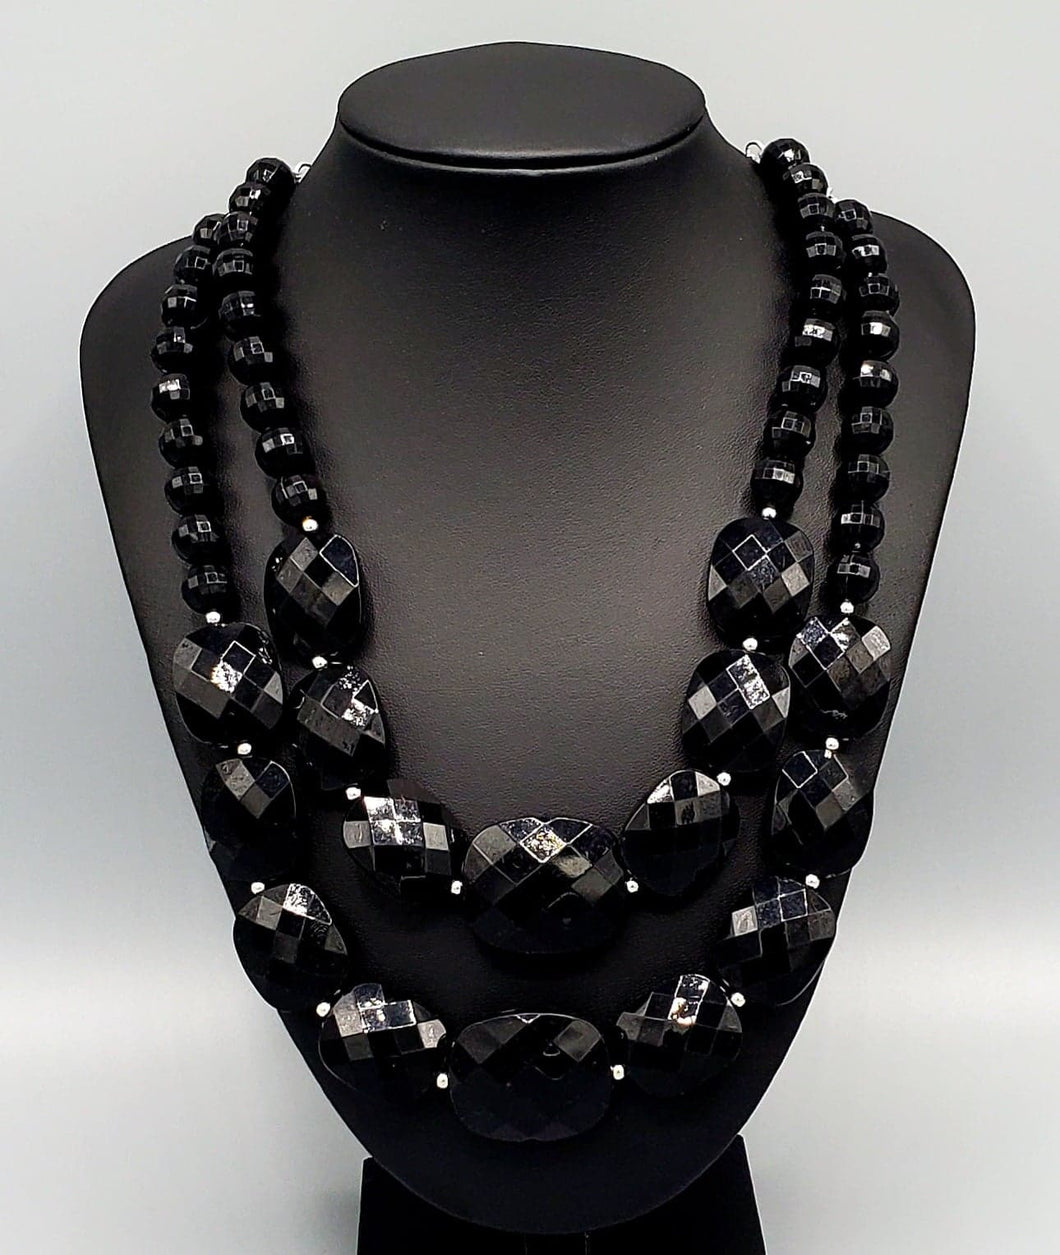 Resort Ready Black Necklace and Earrings